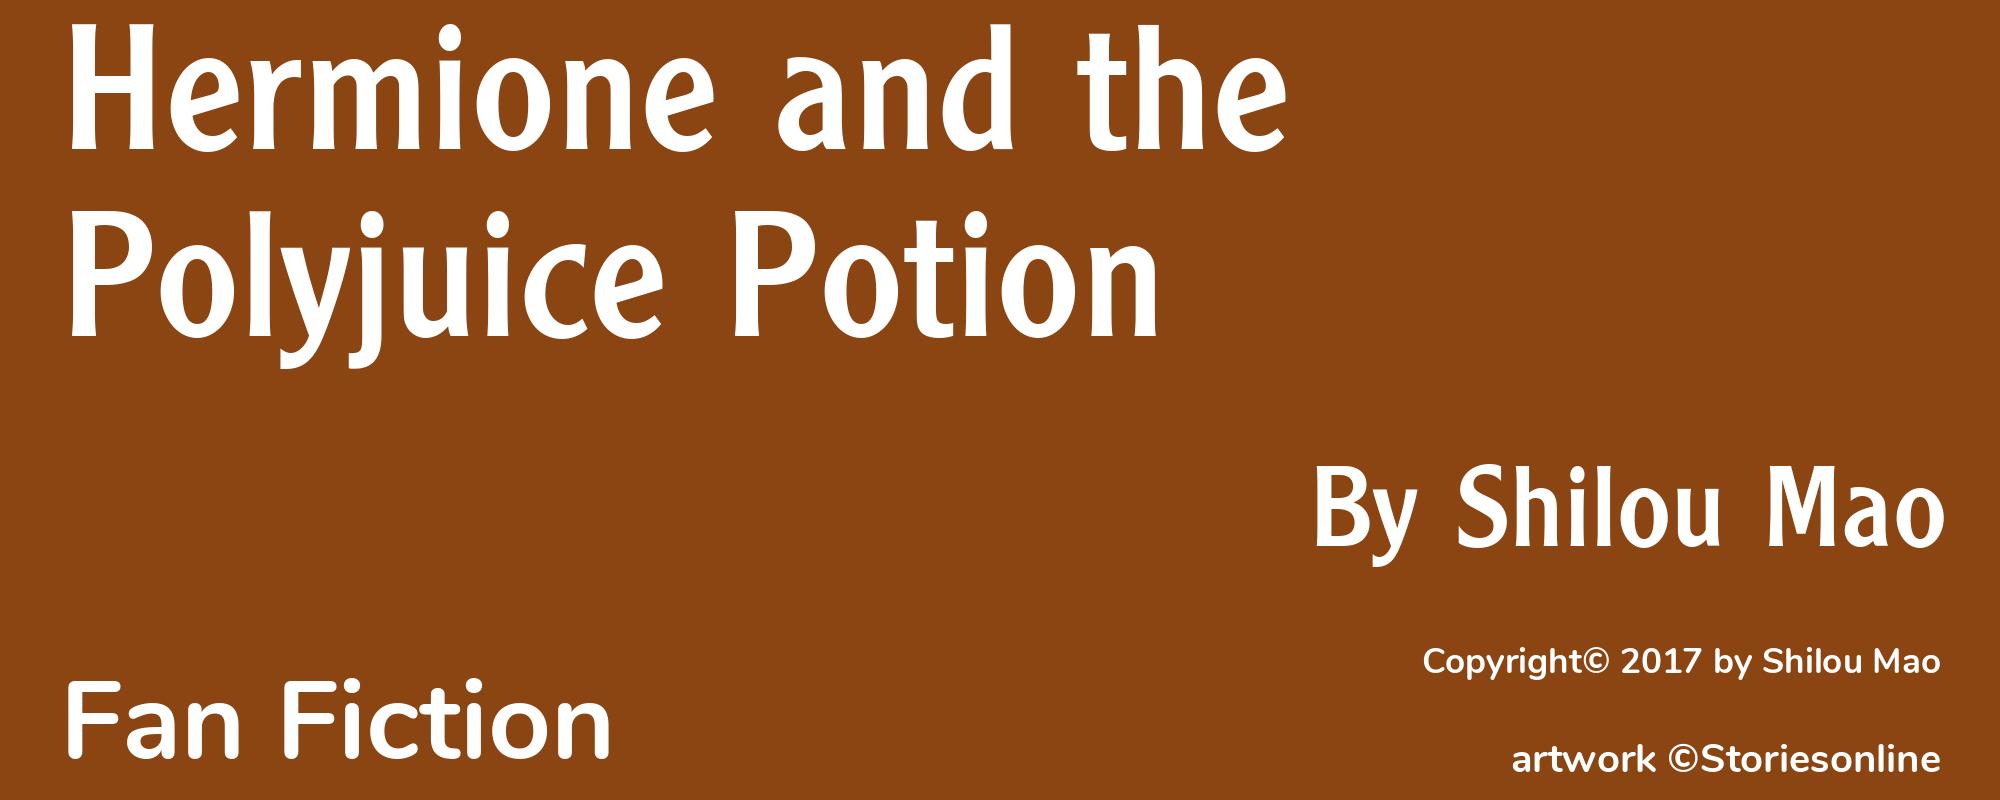 Hermione and the Polyjuice Potion - Cover